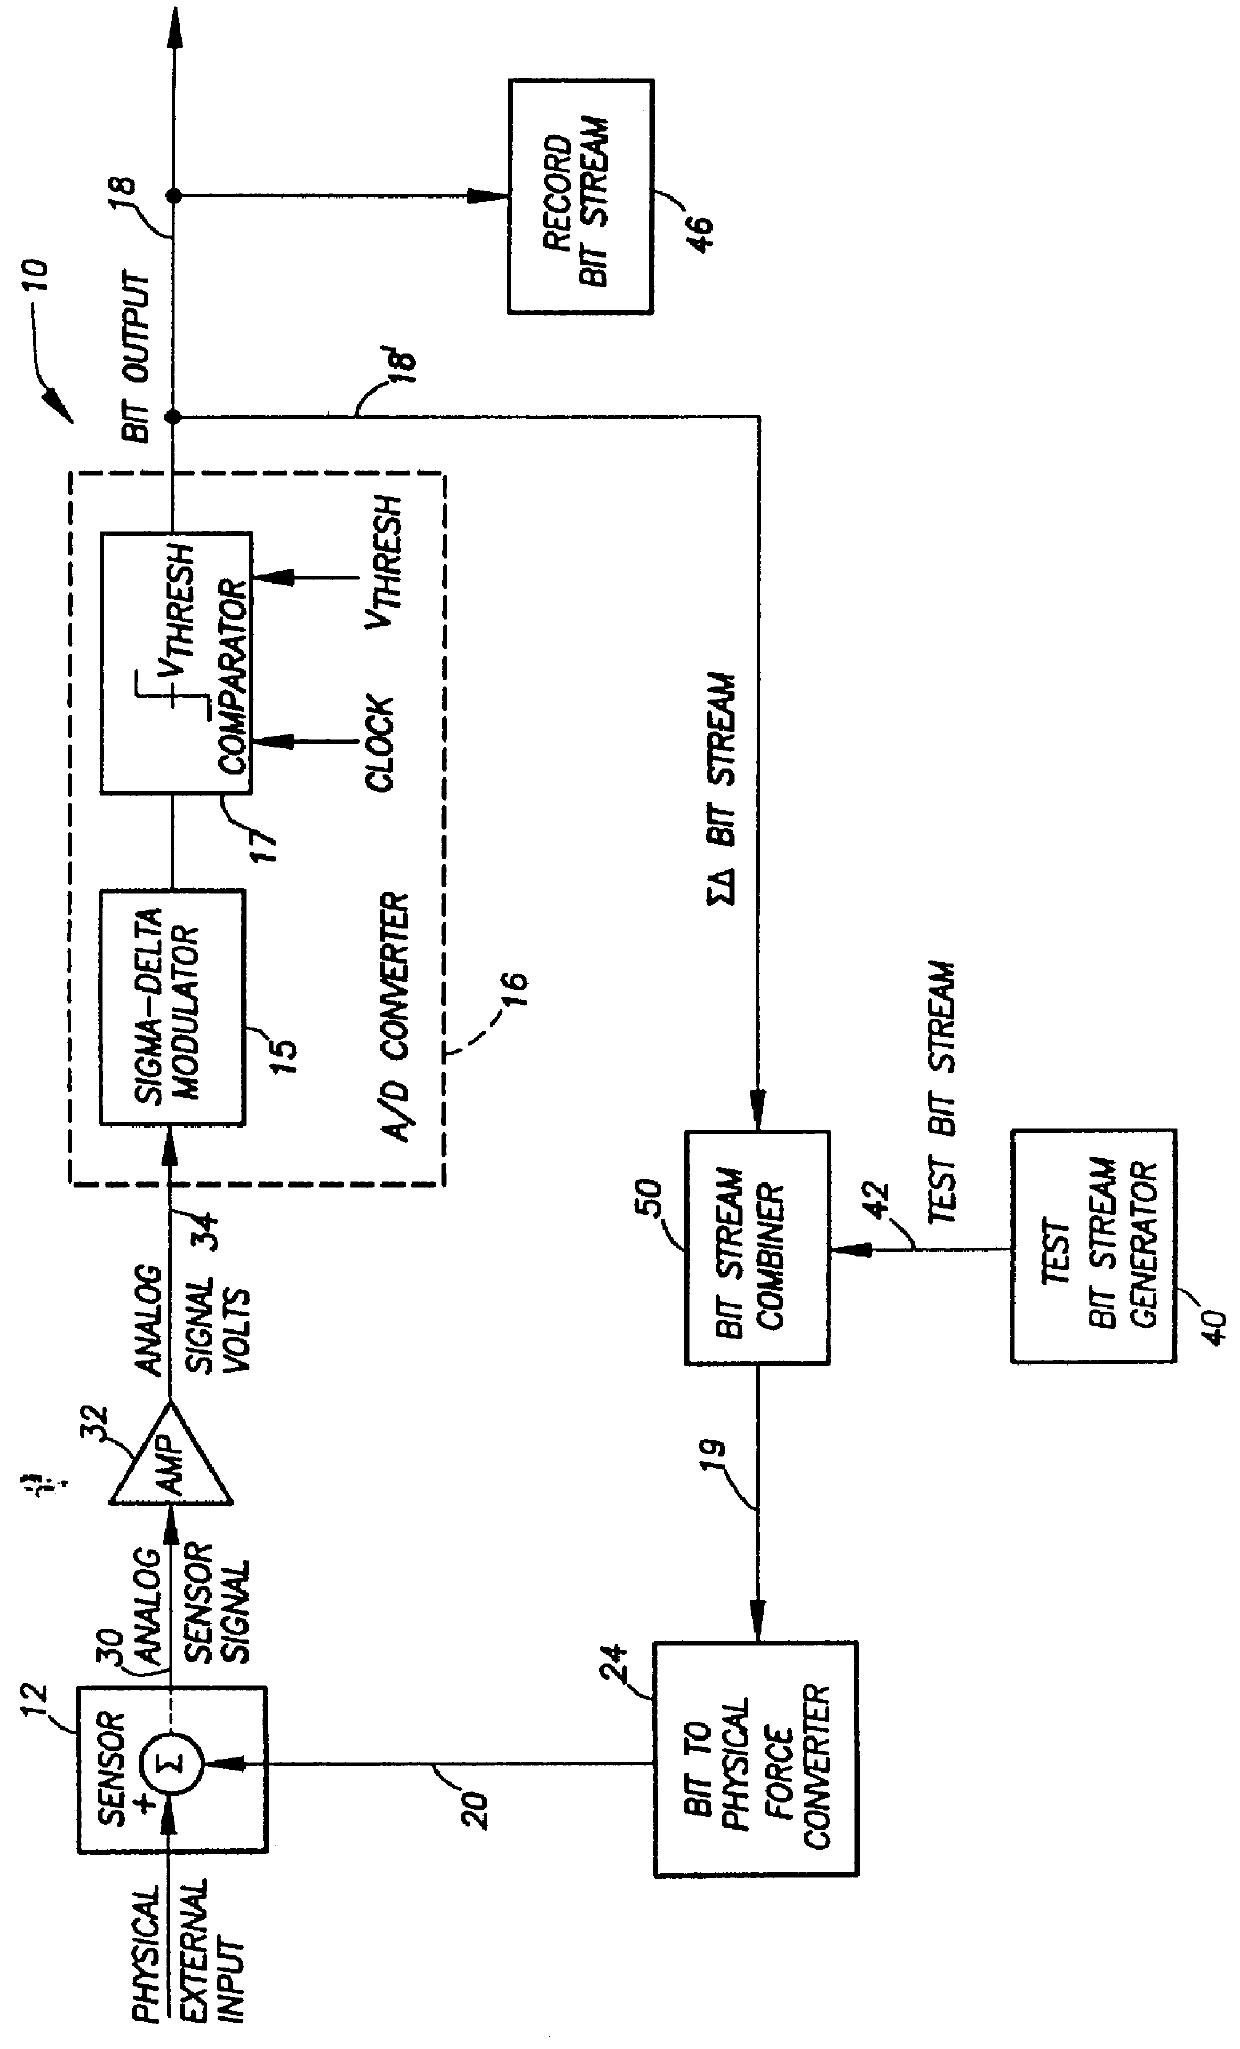 Method and apparatus for generation of test bitstreams and testing of closed loop transducers